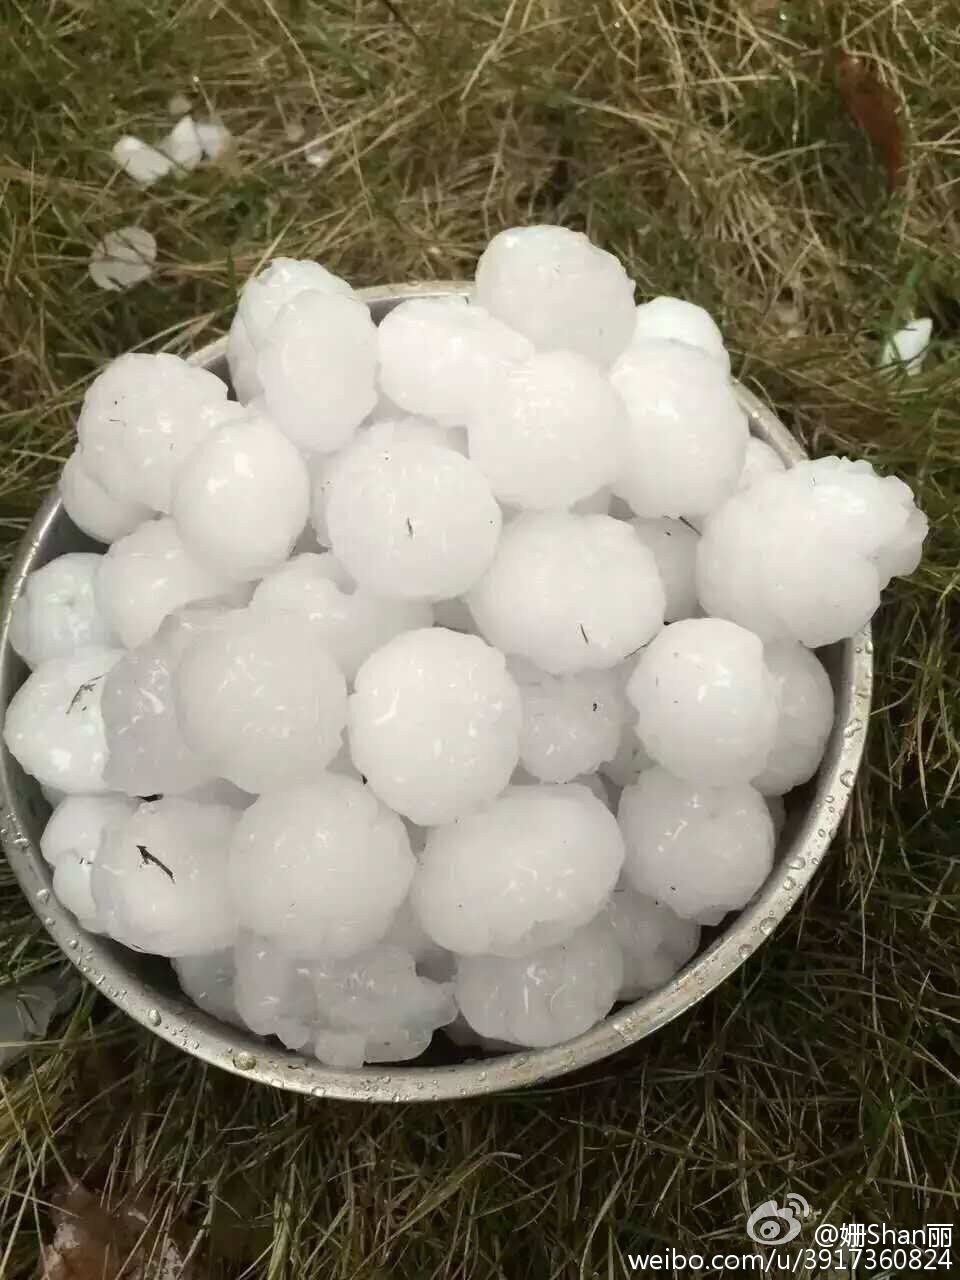 Hailstones collected in Hunan Province. (Sina Weibo)